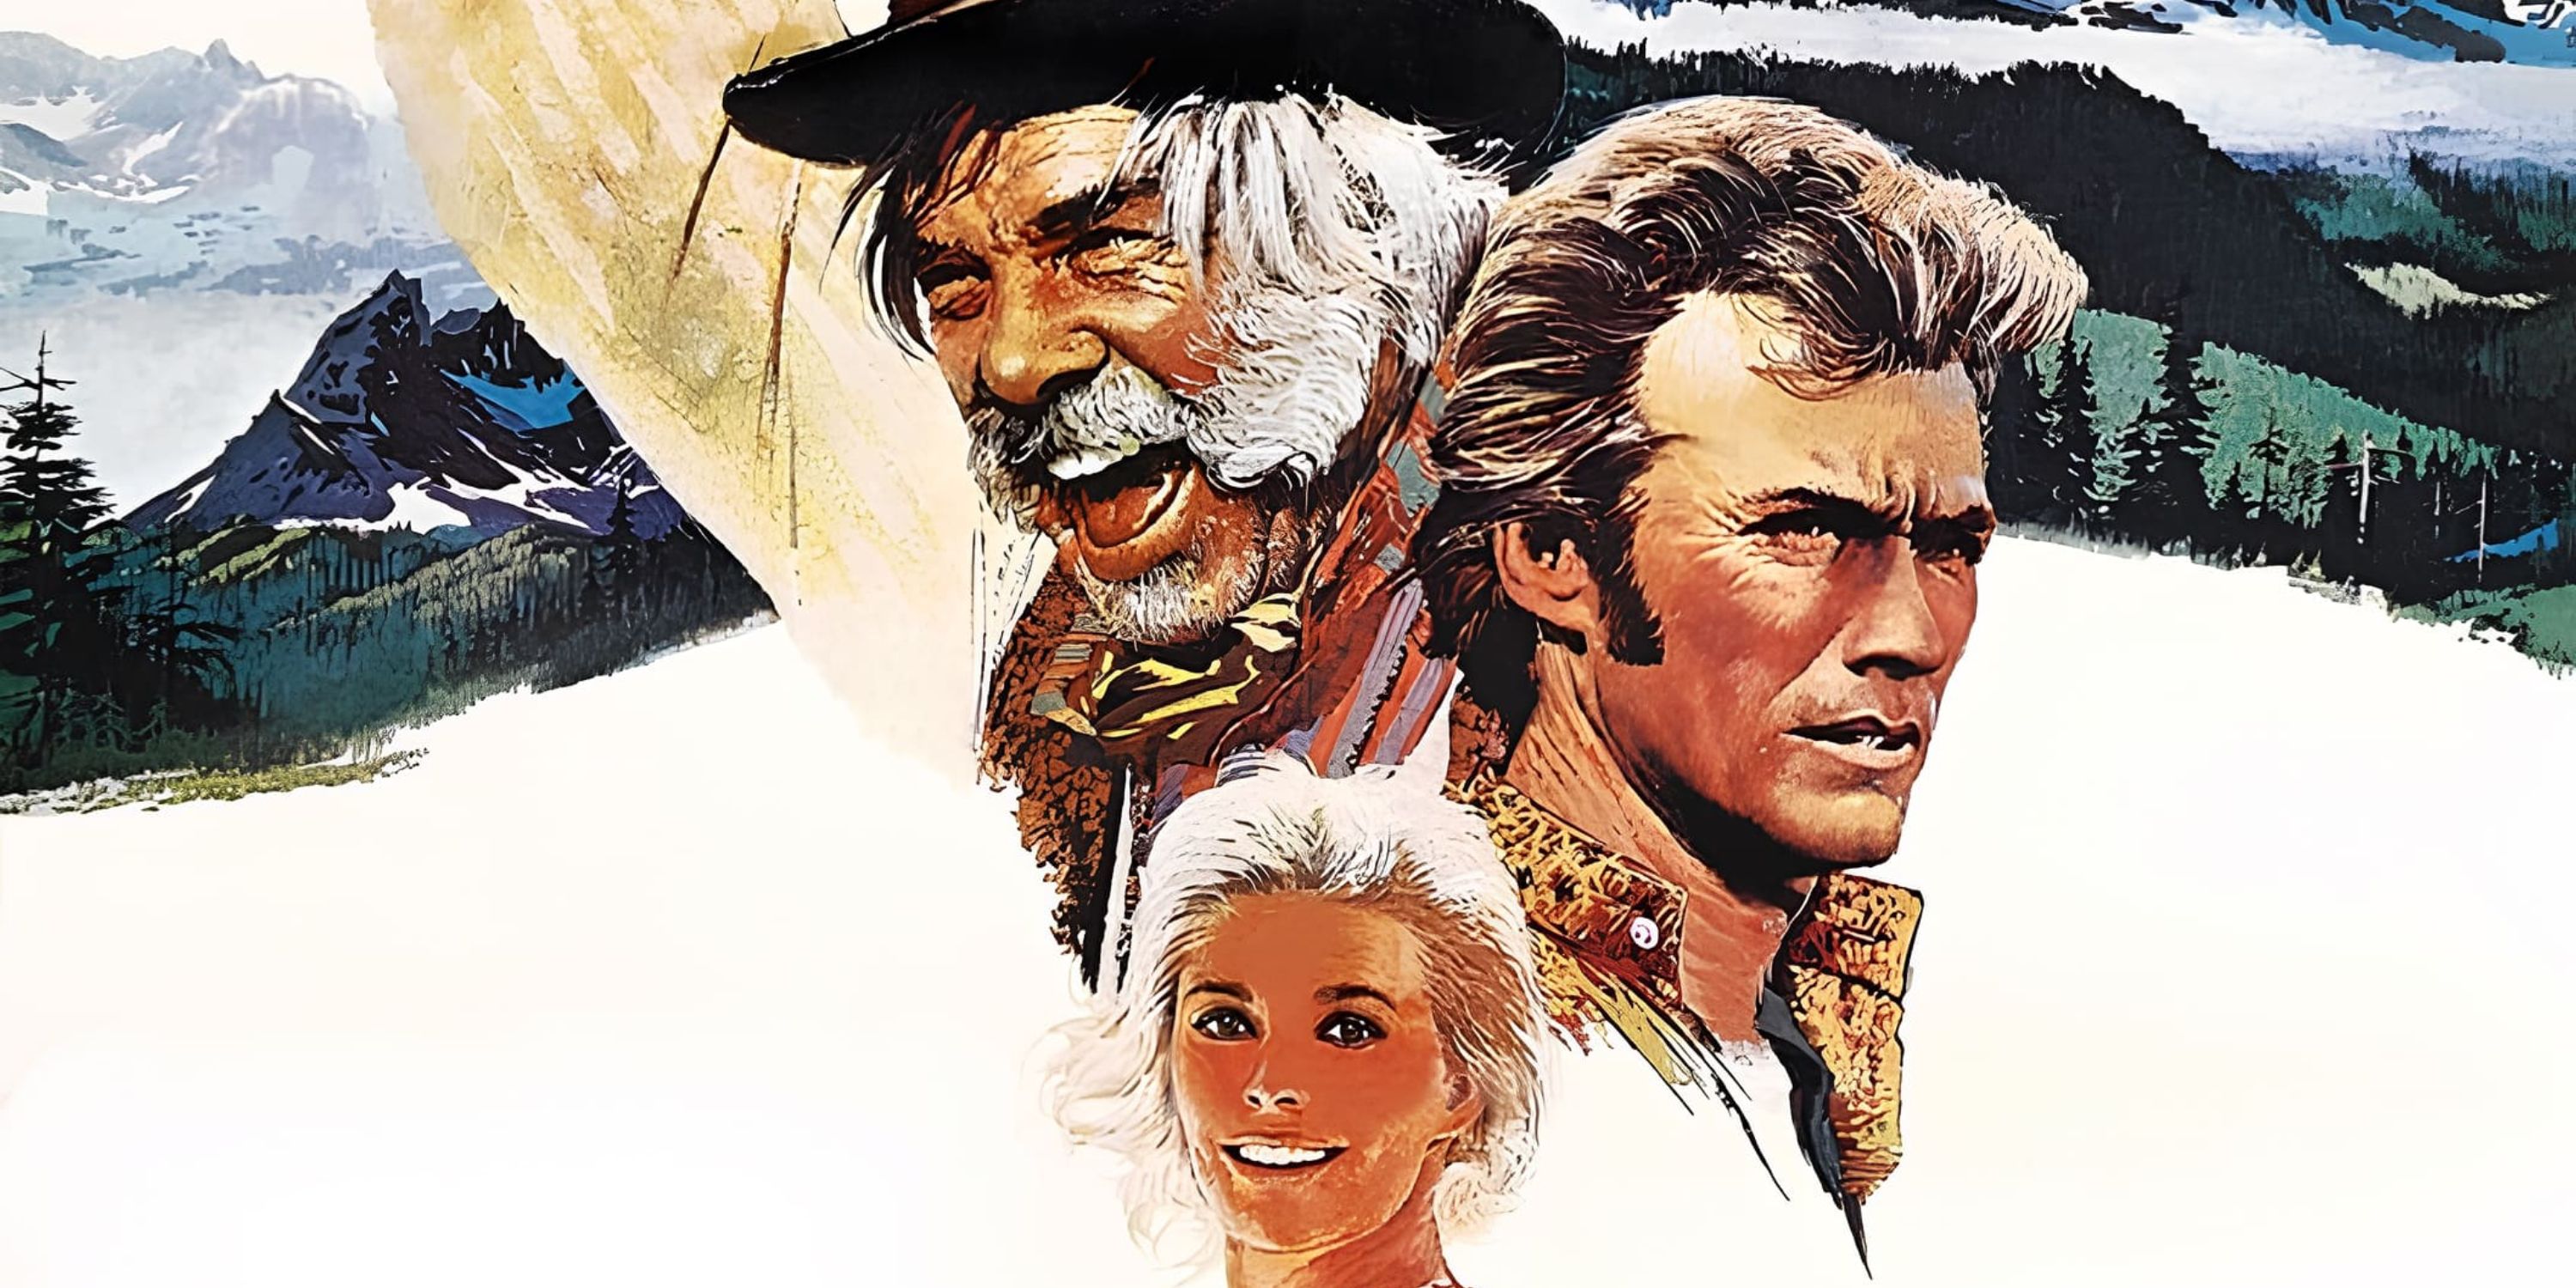 Paint Your Wagon - 1969 - poster